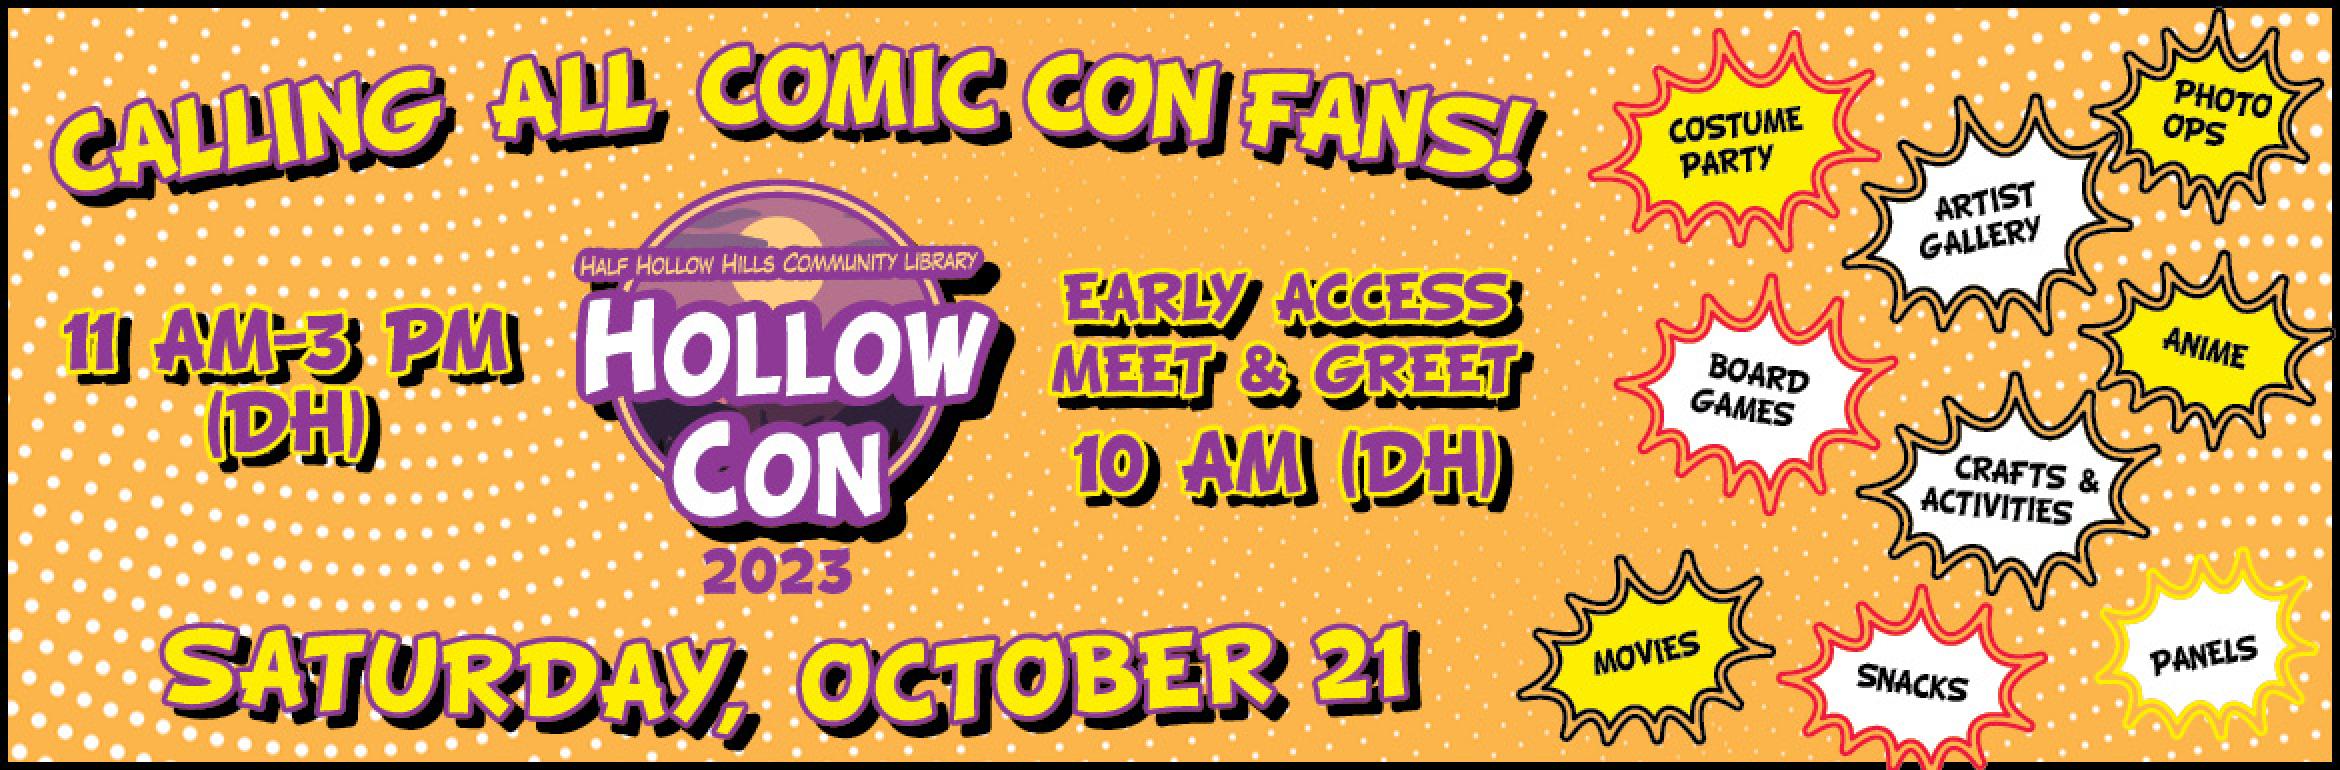 Calling all Comic Con fans! Half Hollow Hills Community Library HollowCon 2023. 11 AM–3 PM (DH). Early Access Meet & Greet 10 AM (DH). Saturday, October 21. Costume Party. Artist Gallery. Photo Ops. Board Games. Crafts & Activities. Anime. Movies. Snacks. Panels.